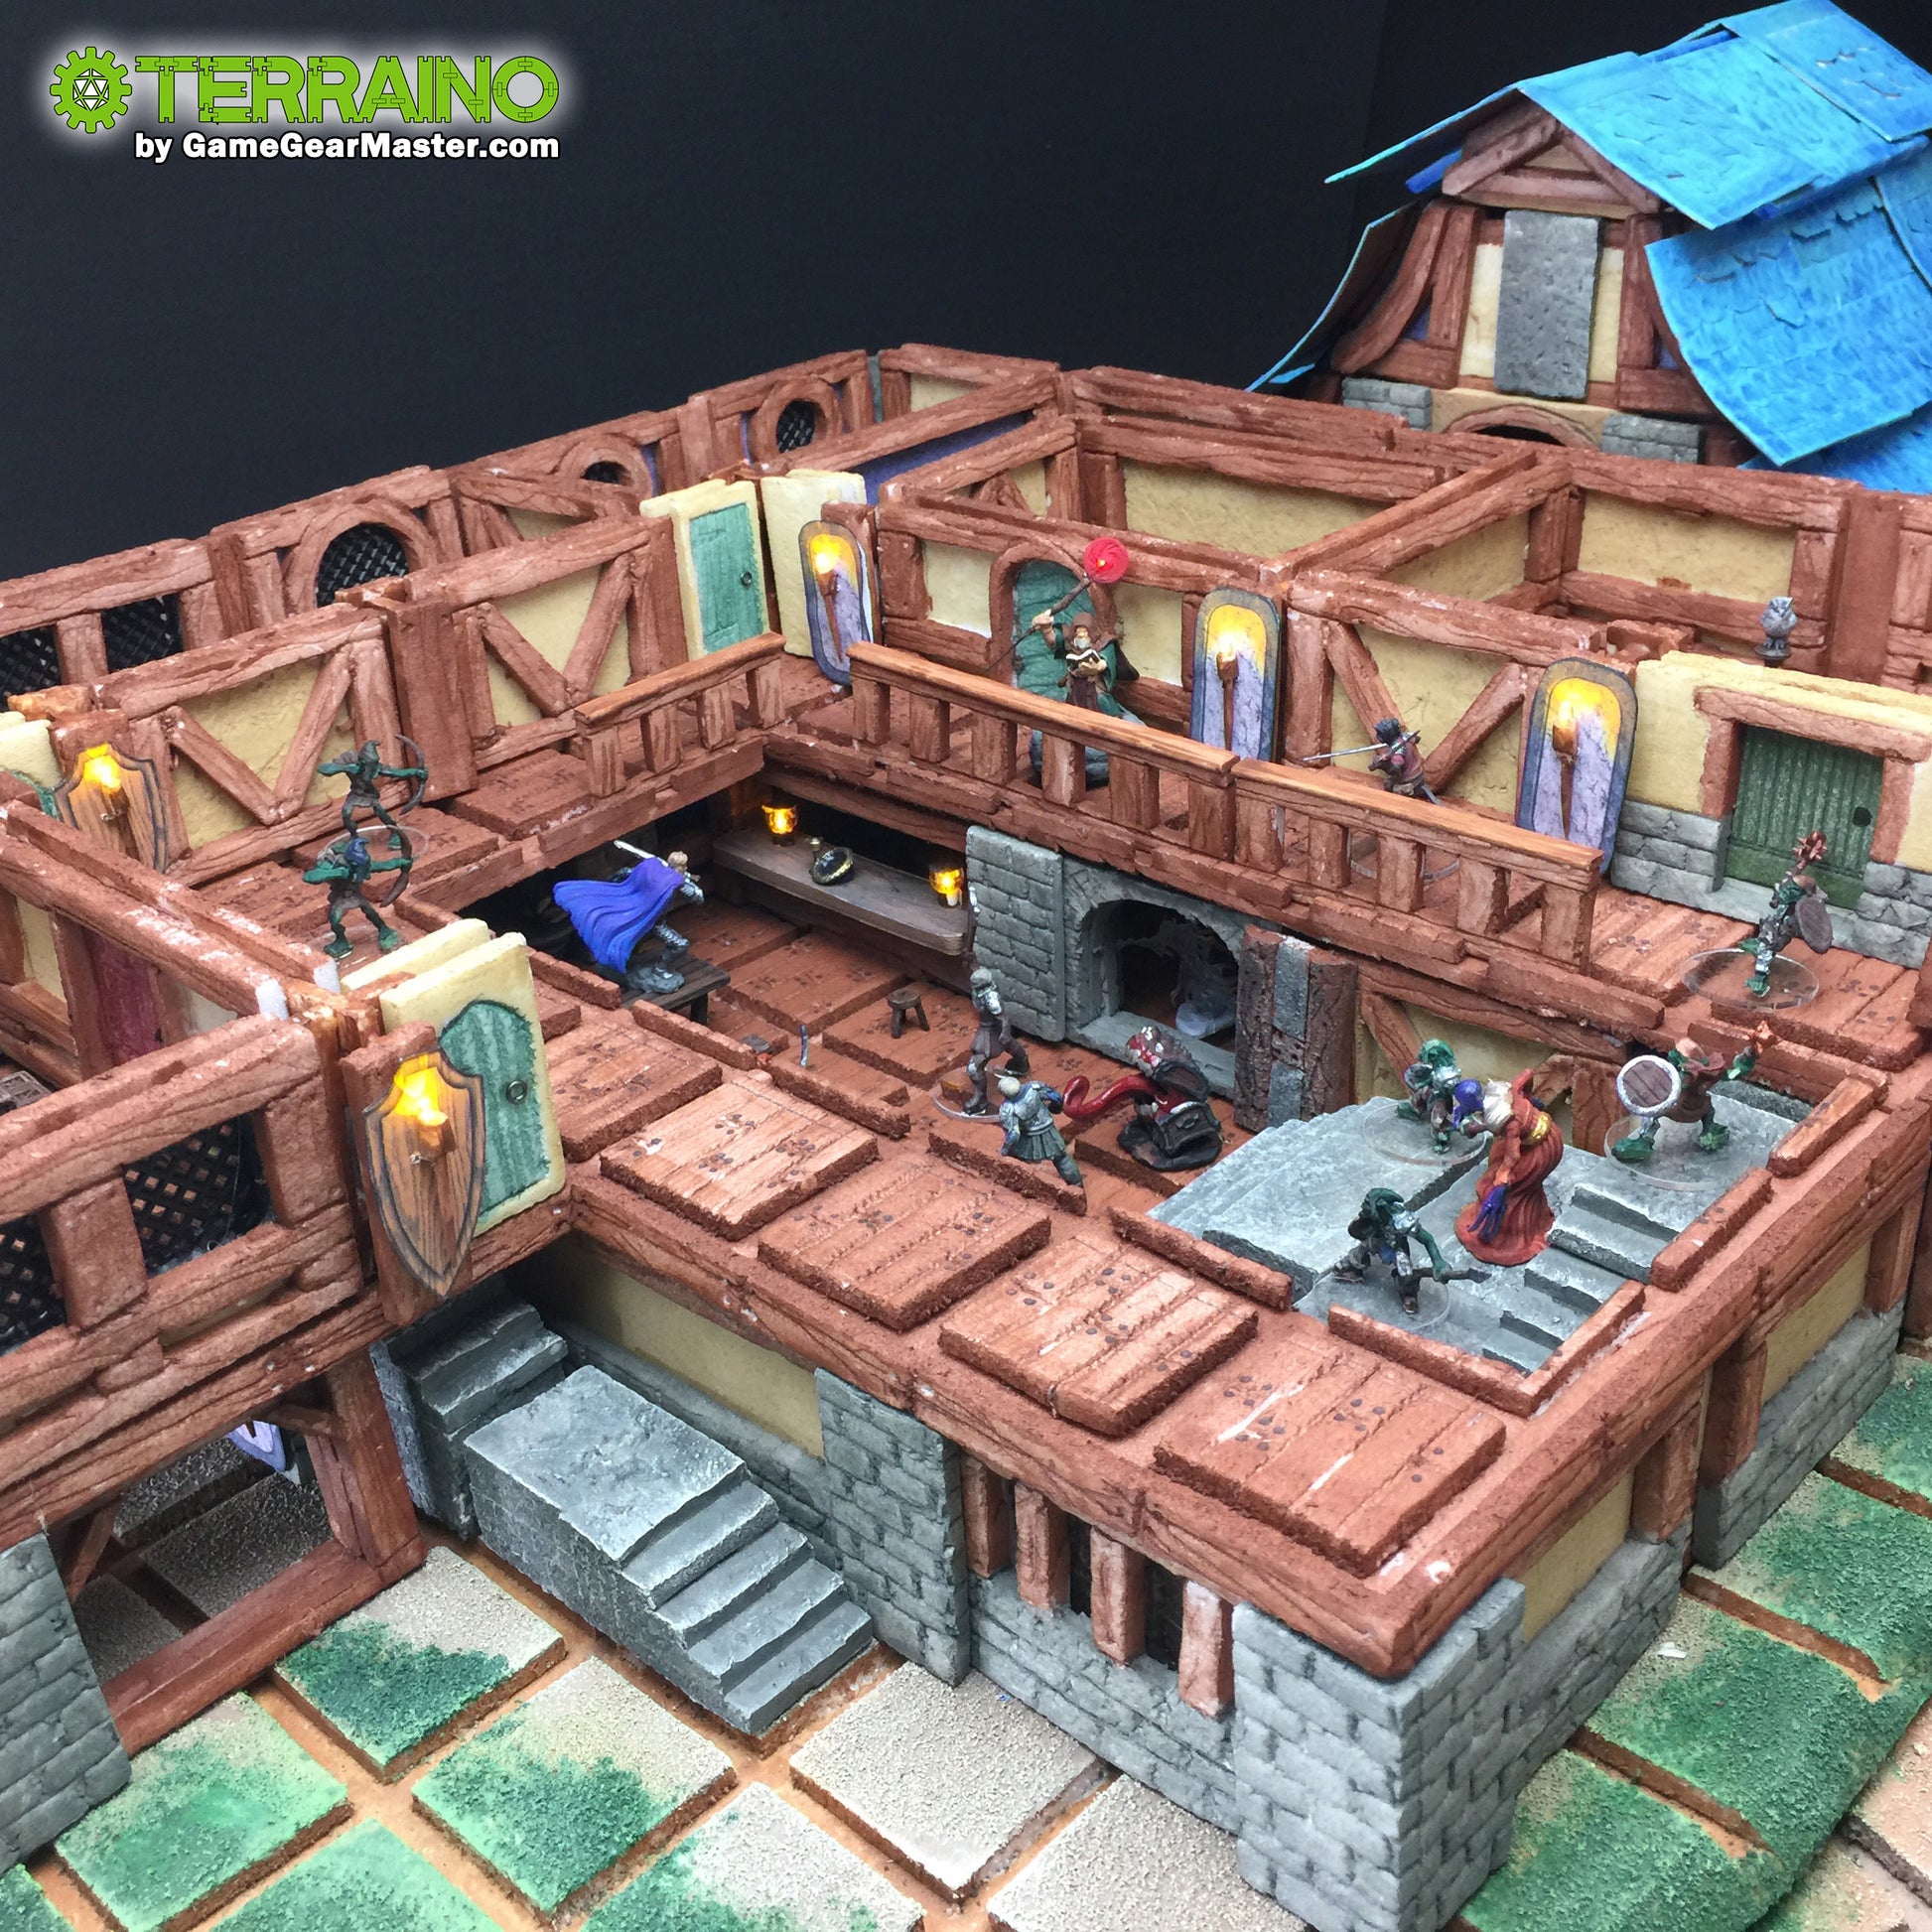 Use TERRAINO to build multilevel buildings with removable floors and roof